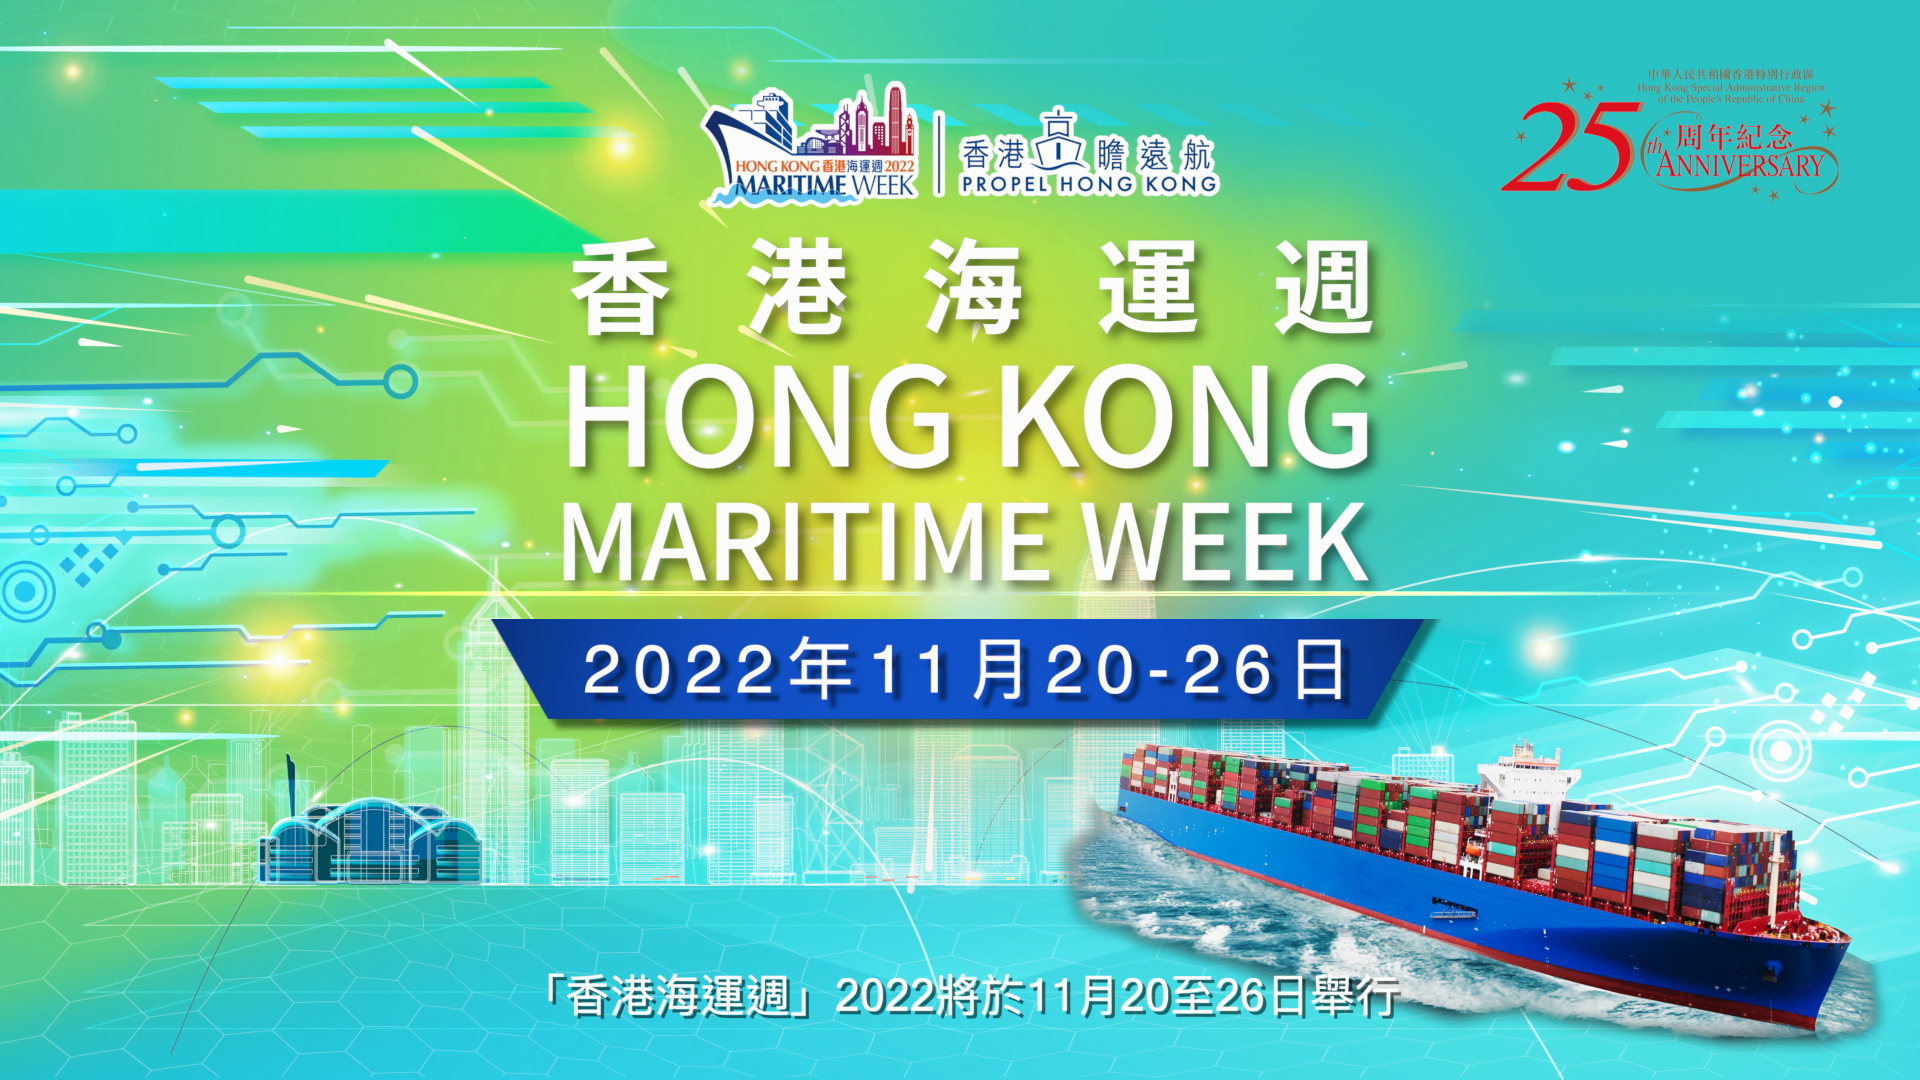 Hong Kong Maritime Week 2022 - Promotion Video (Chinese Only) (Video Only)